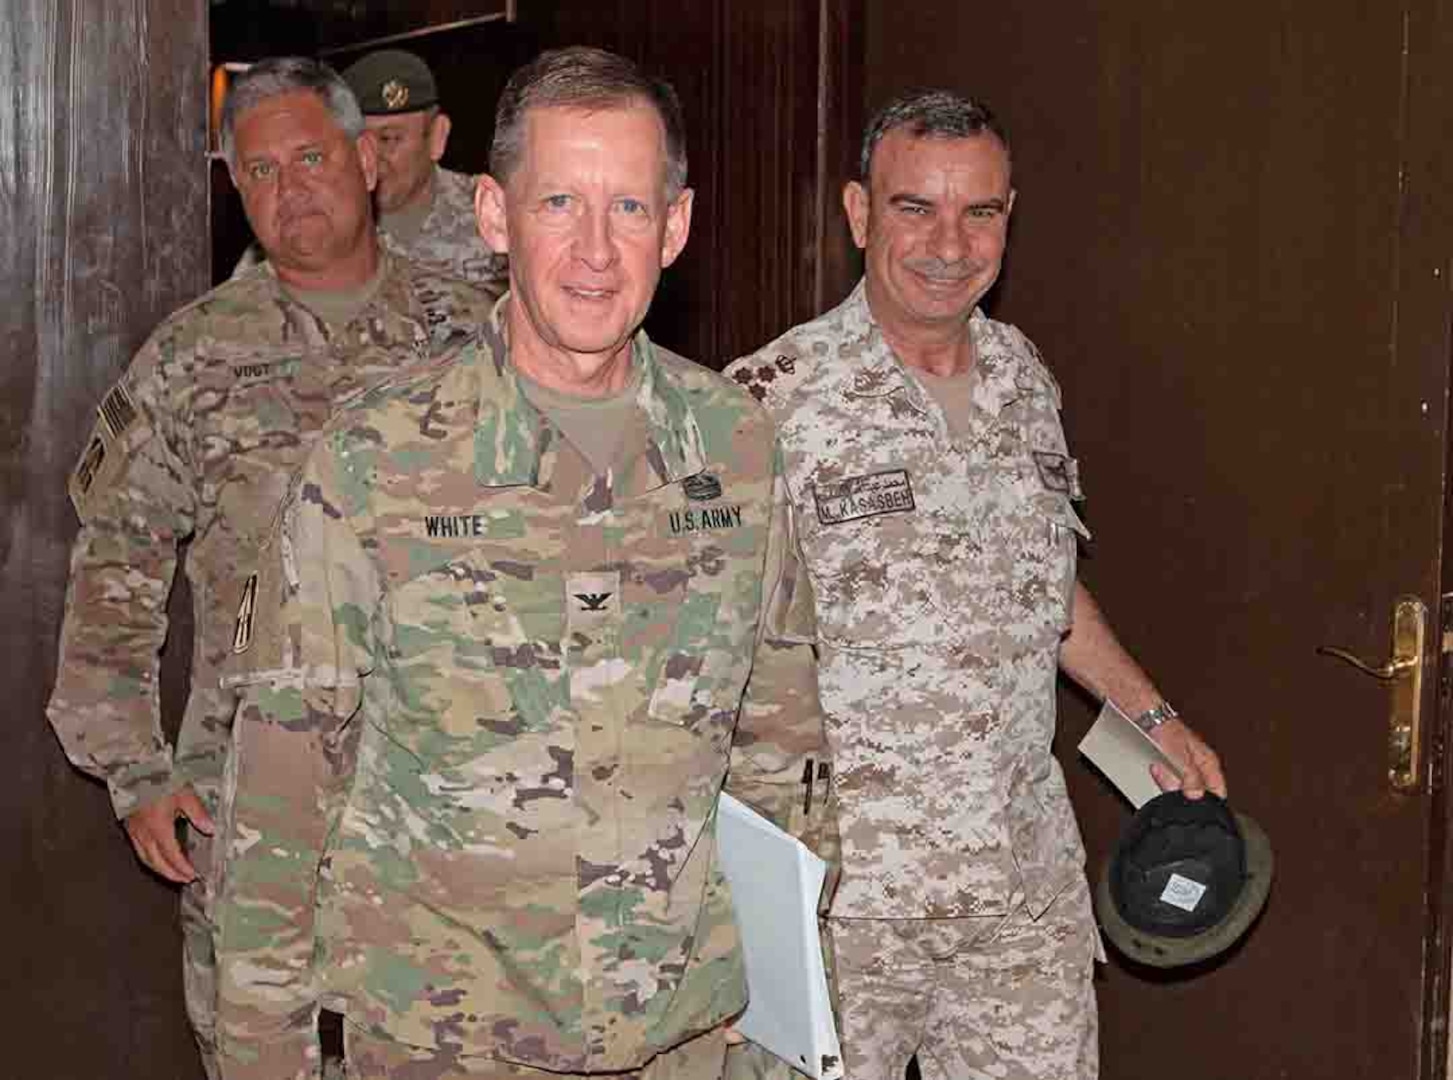 U.S. Army Col. Kirk White (center), senior Army leader of Jordan, walks with Jordan Armed Forces Brig. Gen. Khalid Al-Masaeid (right), Northern region commander, after the closing ceremony for a Jordan Operational Engagement Program (JOEP) training cycle between New Jersey National Guard Soldiers, with 1st Squadron, 102nd Calvary Regiment, 44th Infantry Brigade Combat Team of the 42nd Infantry Division, and Jordan Border Guard Force Soldiers, with the 7th Mechanized Battalion, 48th Mechanized Brigade, at Joint Training Center-Jordan Oct. 3, 2019.